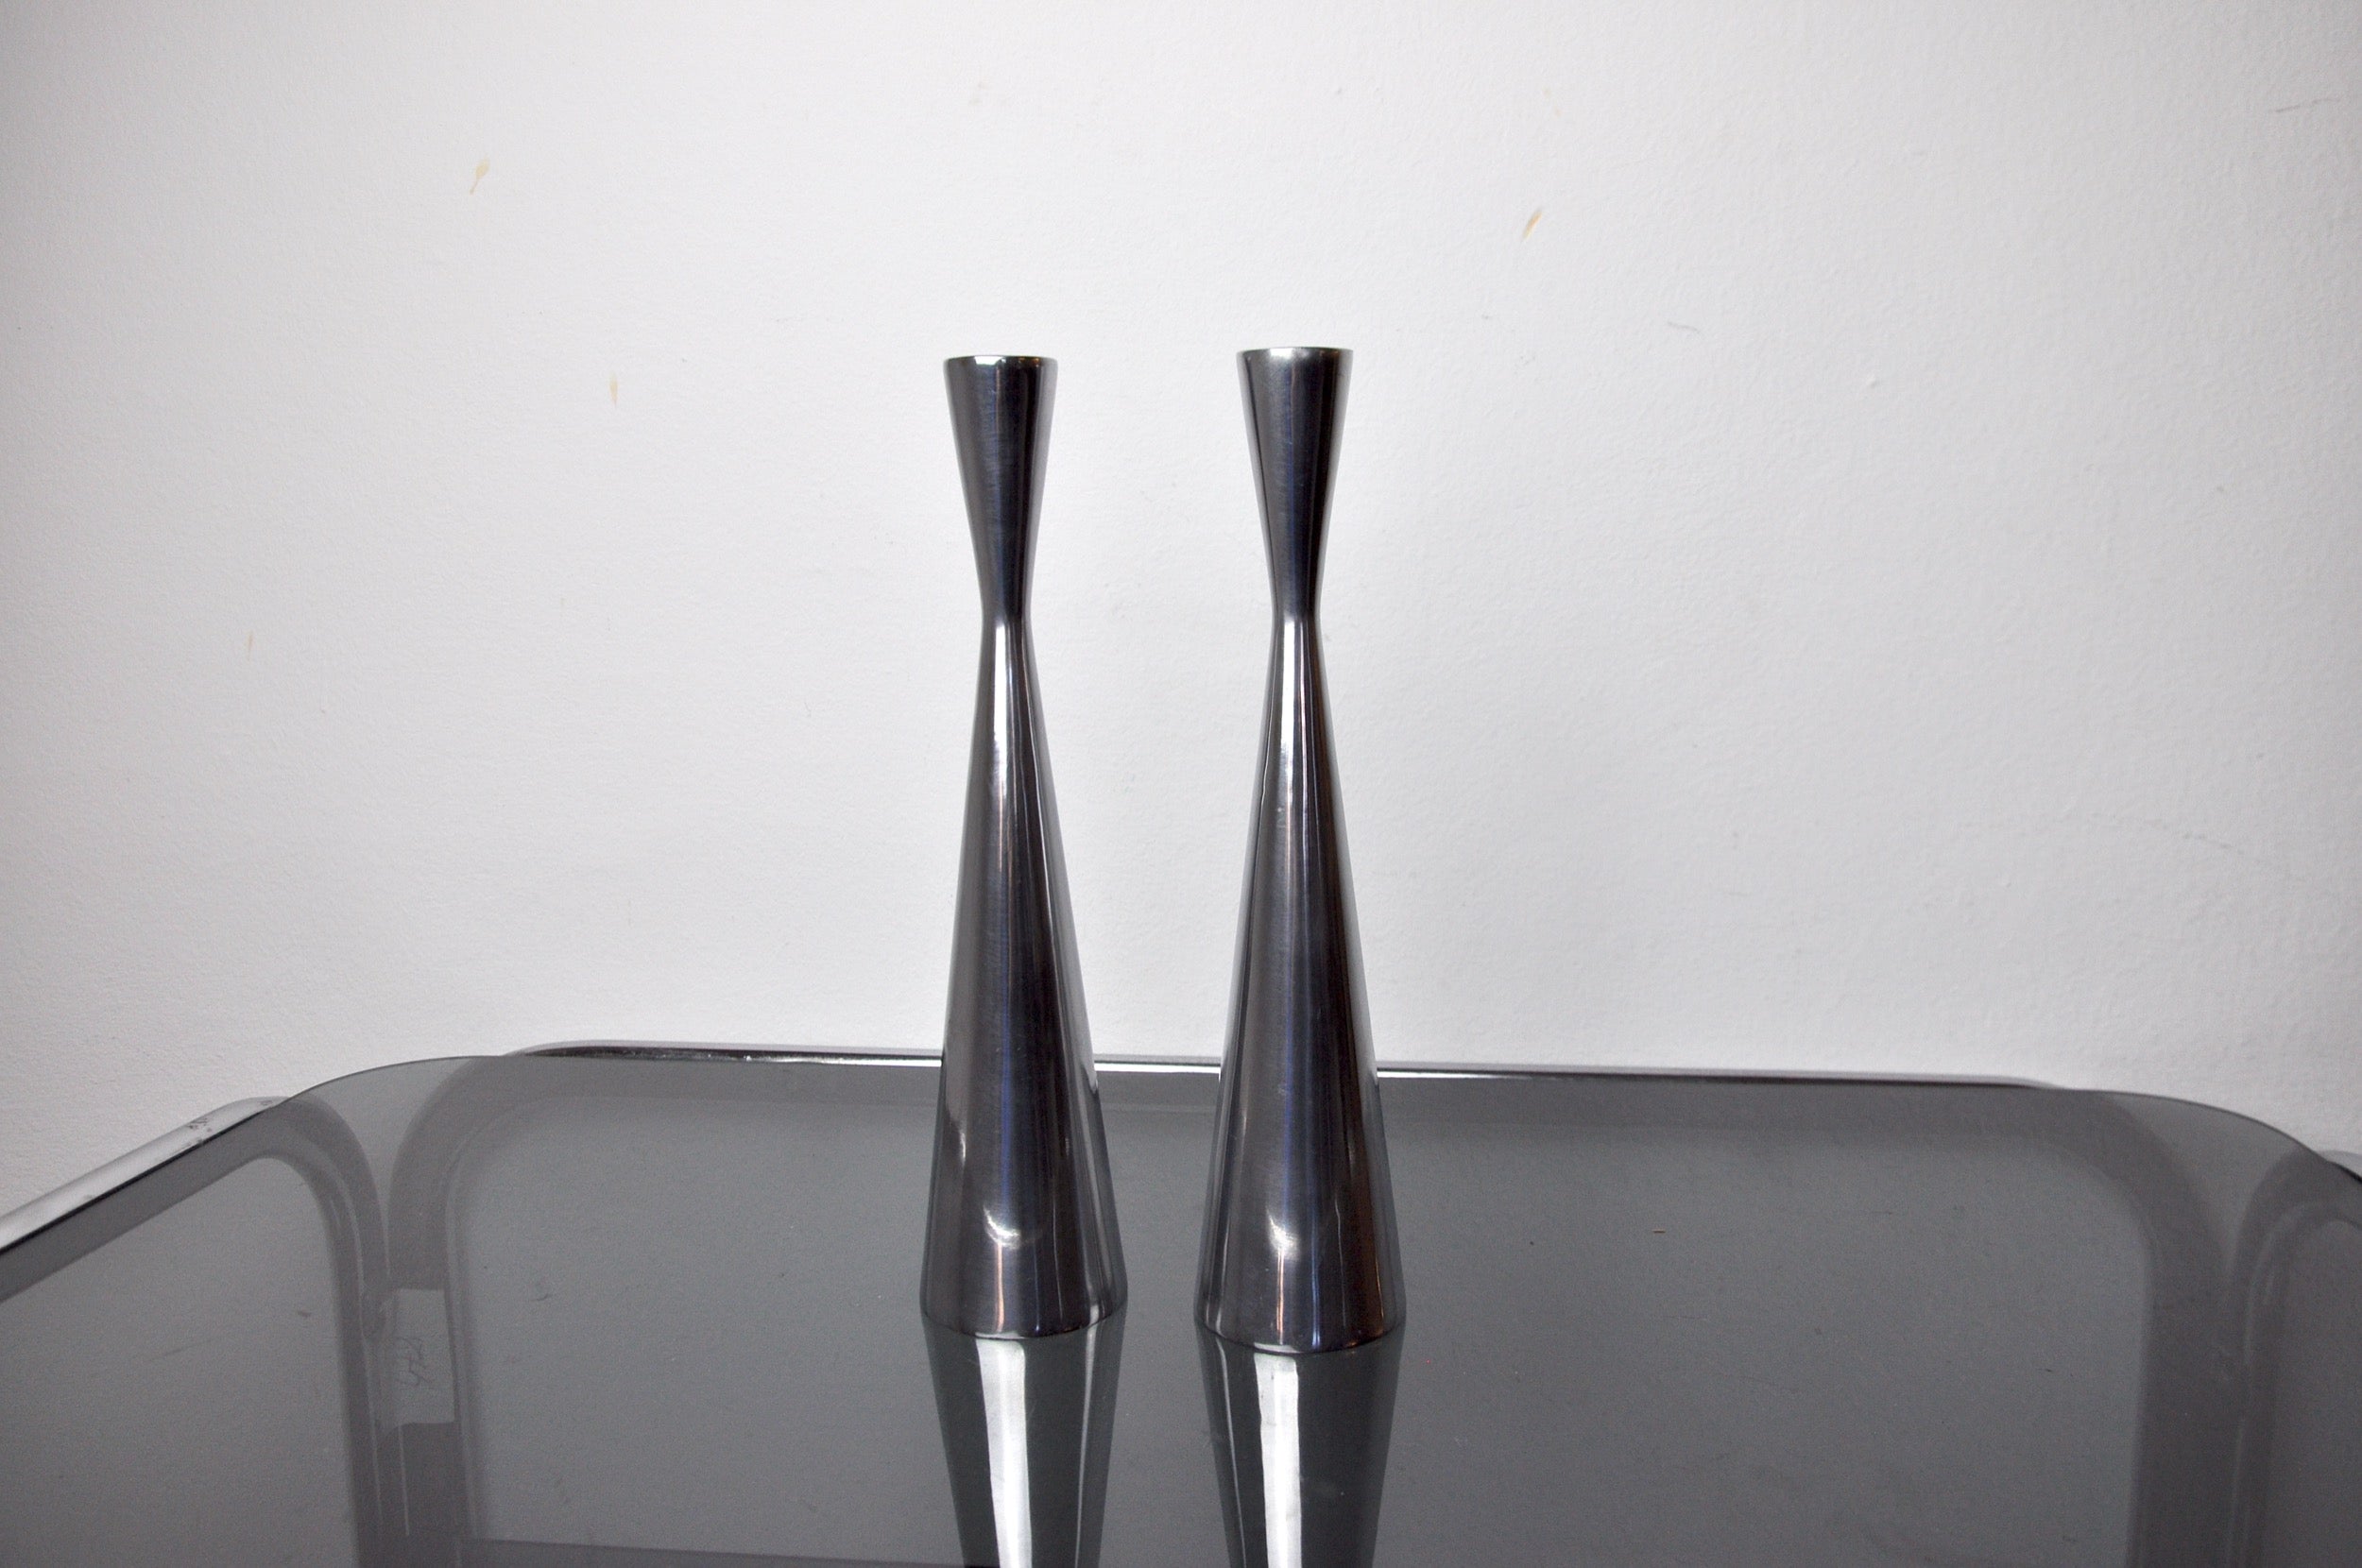 Hollywood Regency Pair of Scandinavian Diabolo Candle Holders, Aluminum, Sweden, circa 1970 For Sale